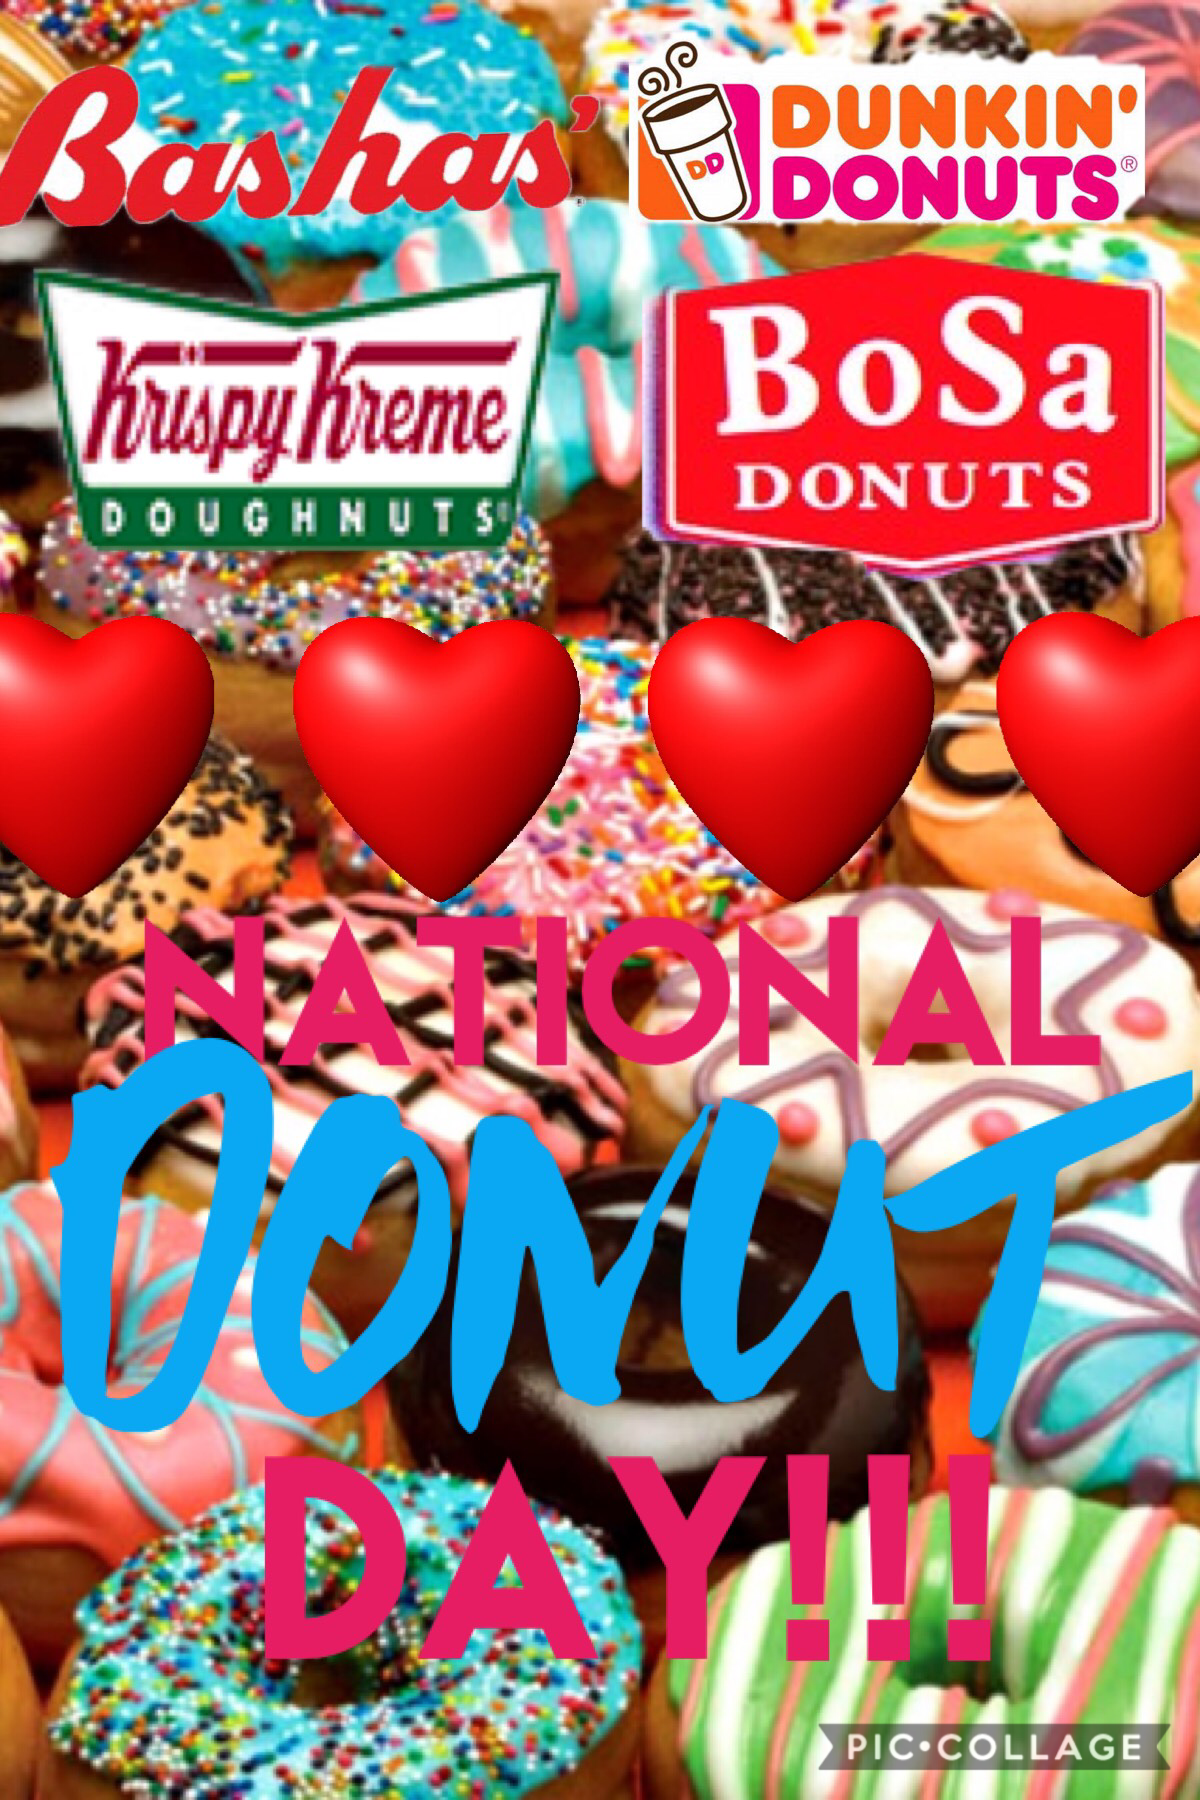 🍩TAP🍩
Hi peeps!!! I haven’t been on in a while and I know that. But national donut day occurred last Friday. Hey let’s try to keep the likes up and being the great followers u are. 